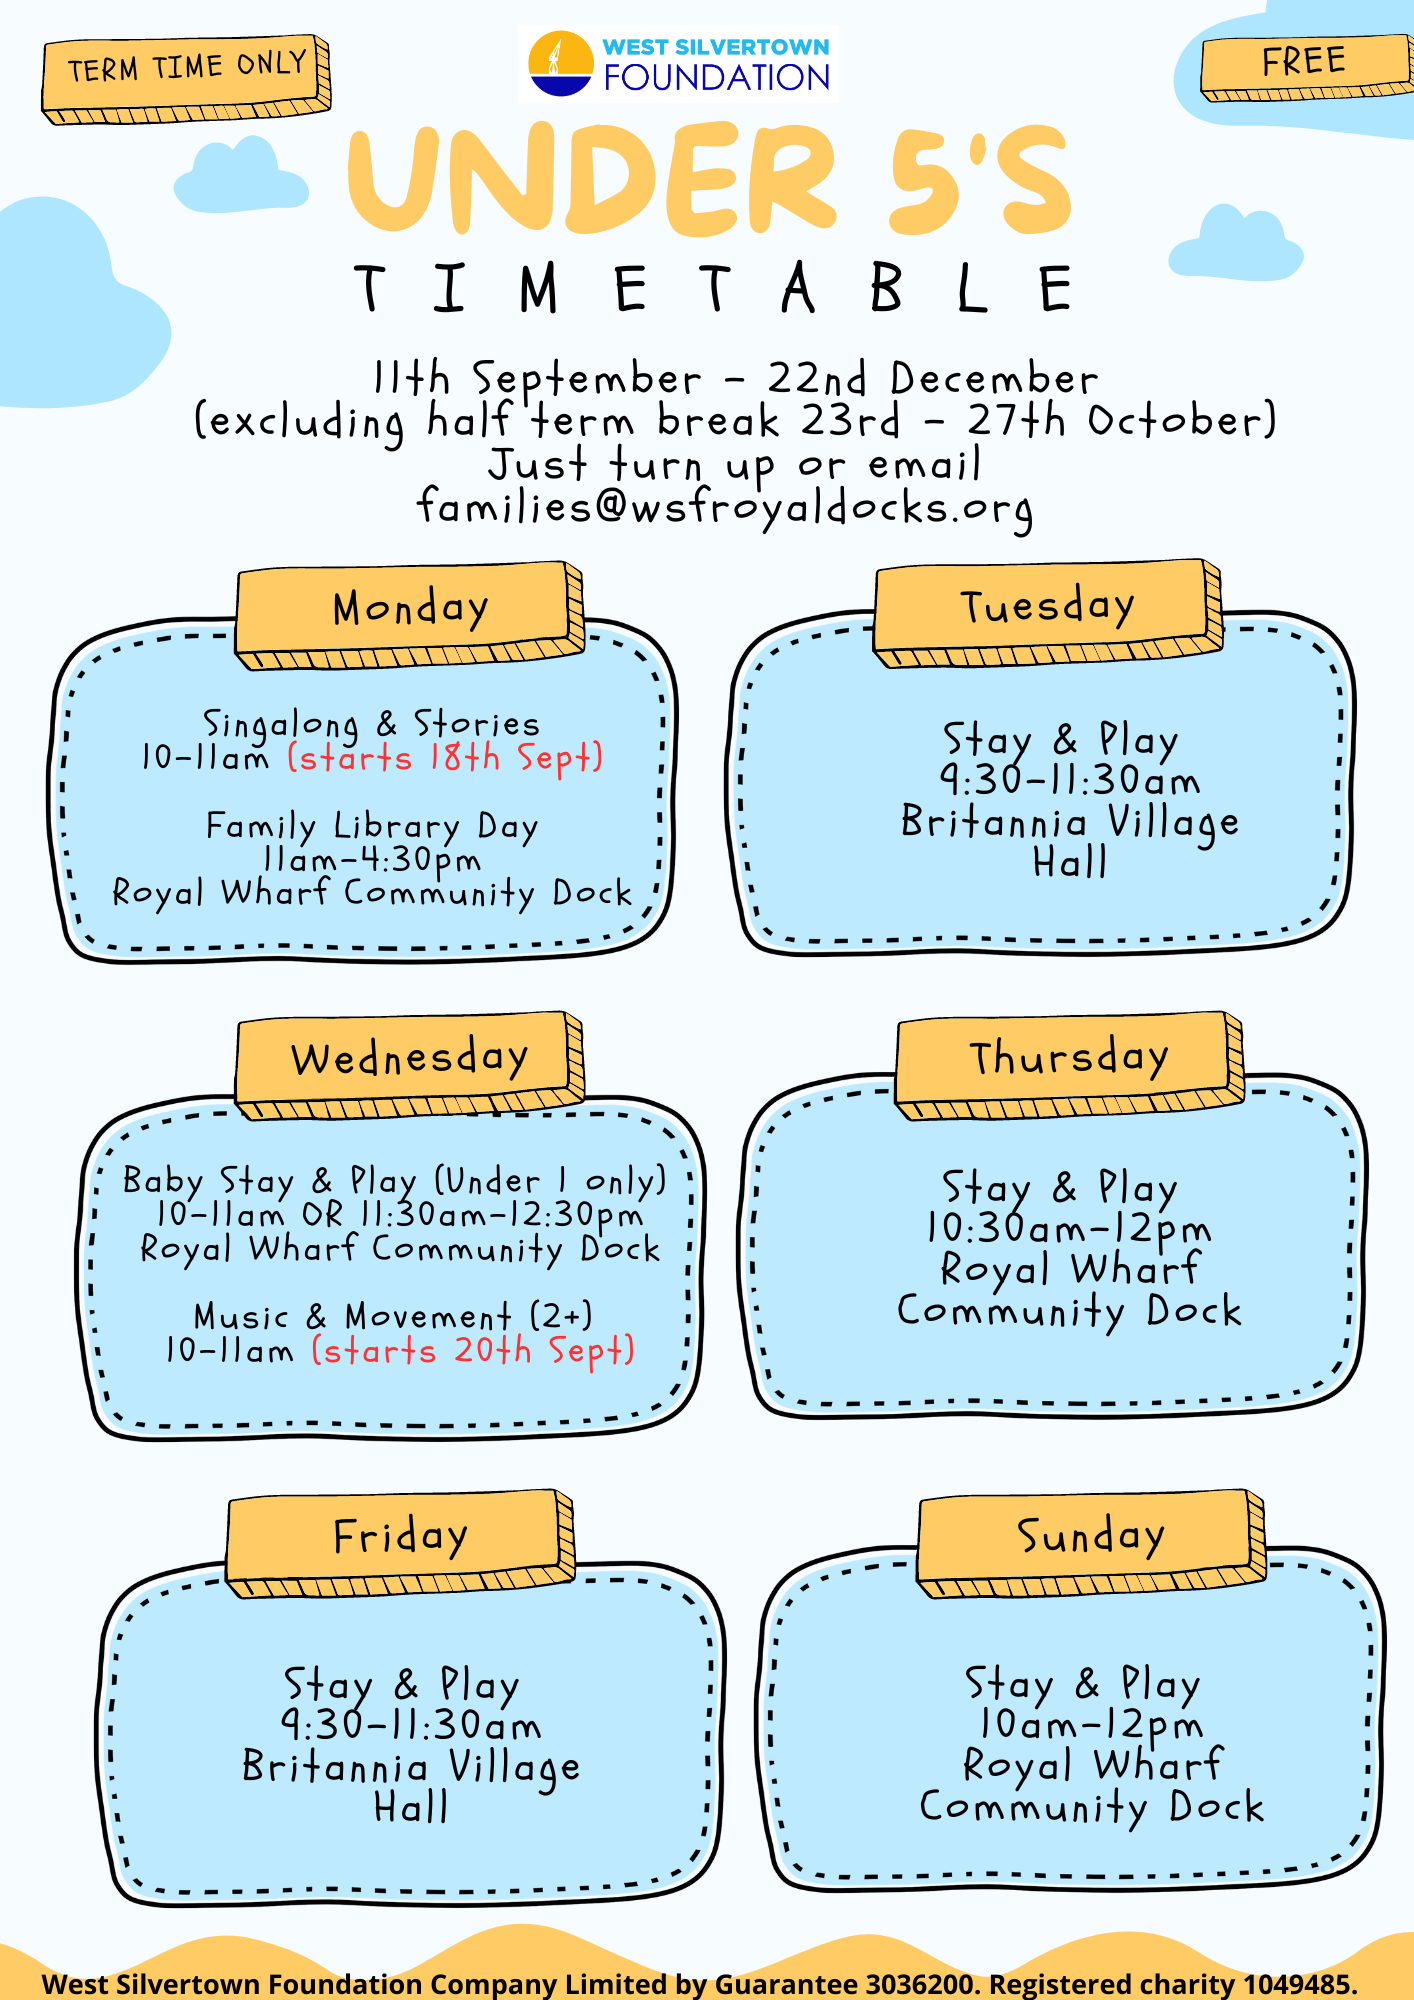 Under 5s timetable